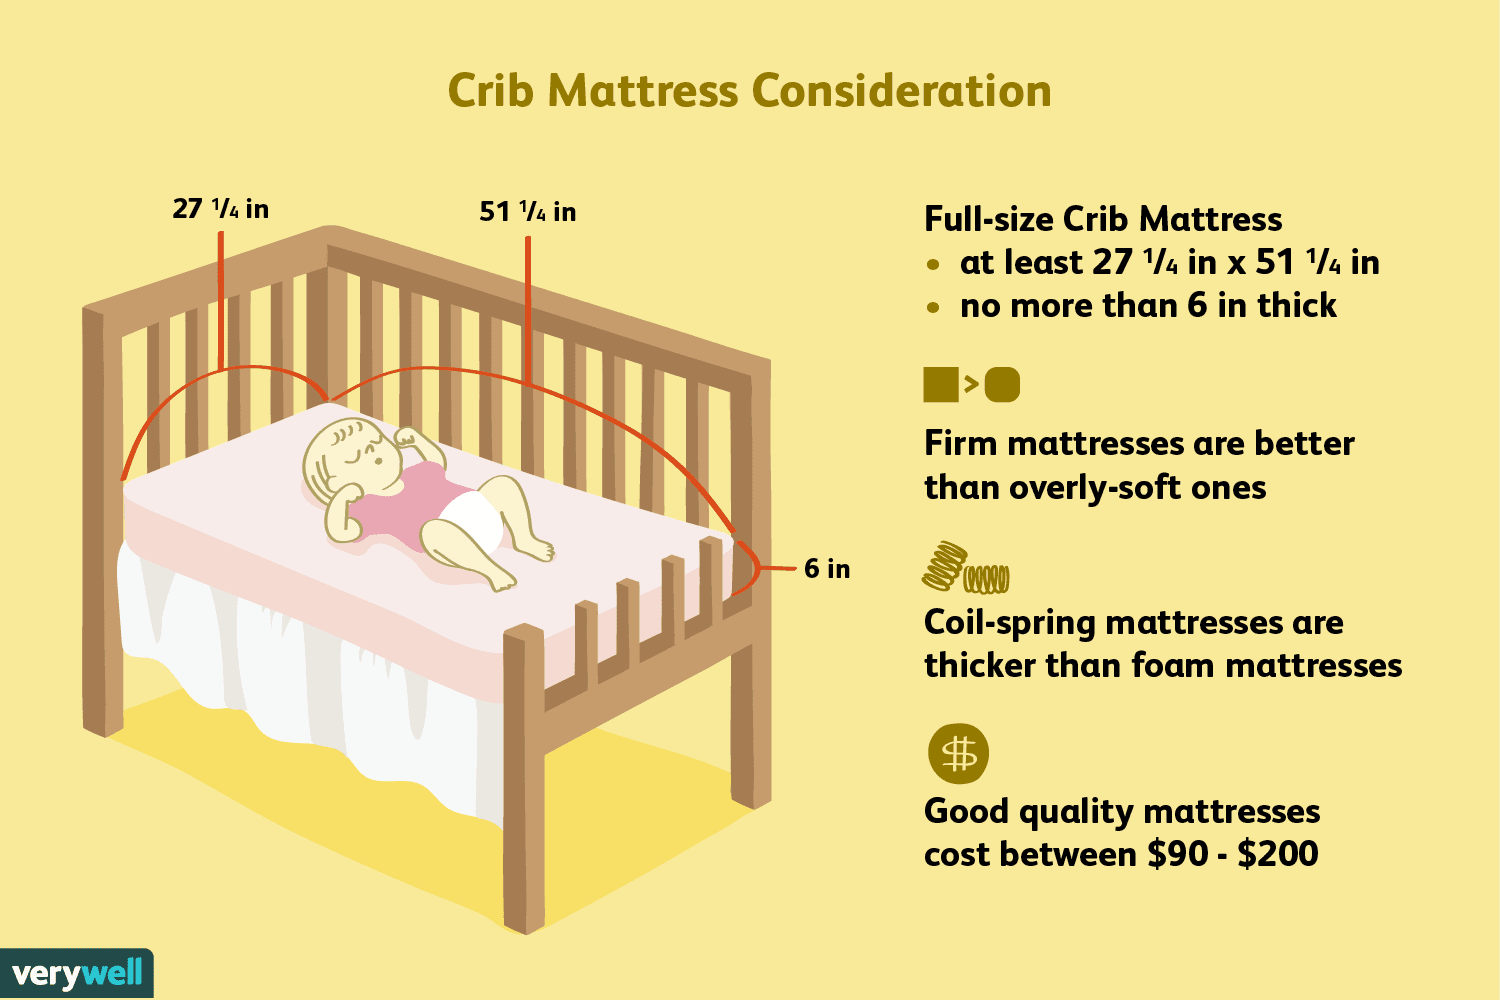 How Long Is A Crib Mattress Good For?